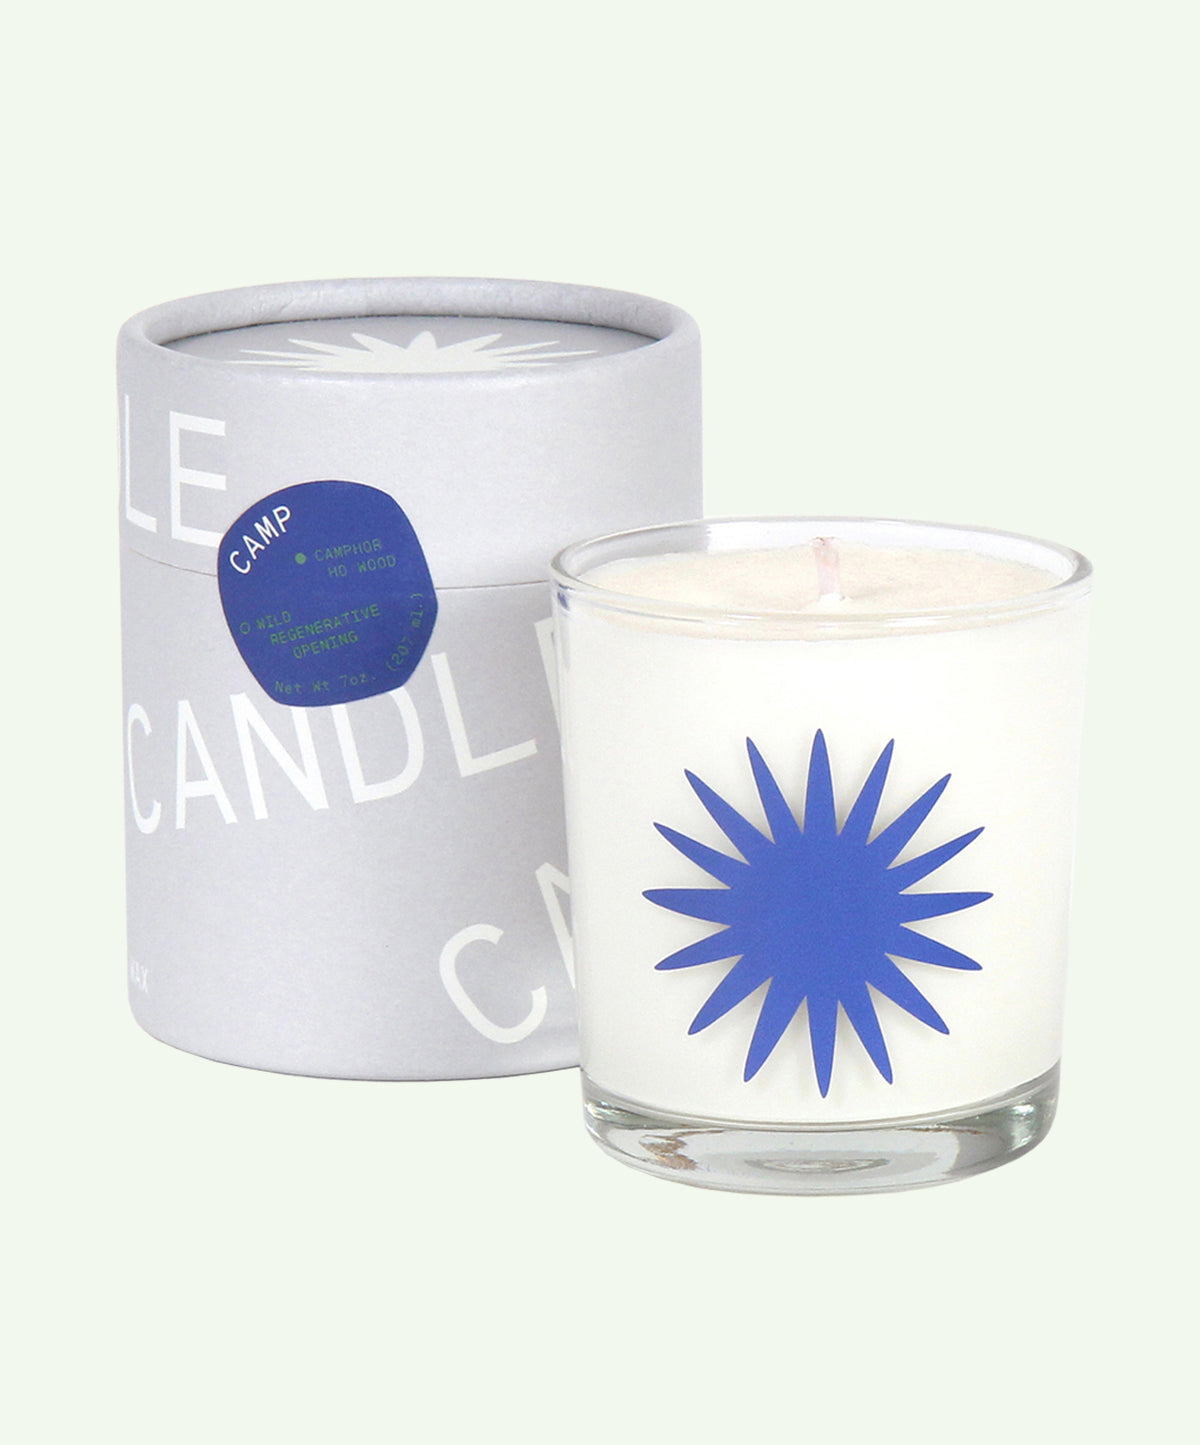 Camp Essential Oil Candle